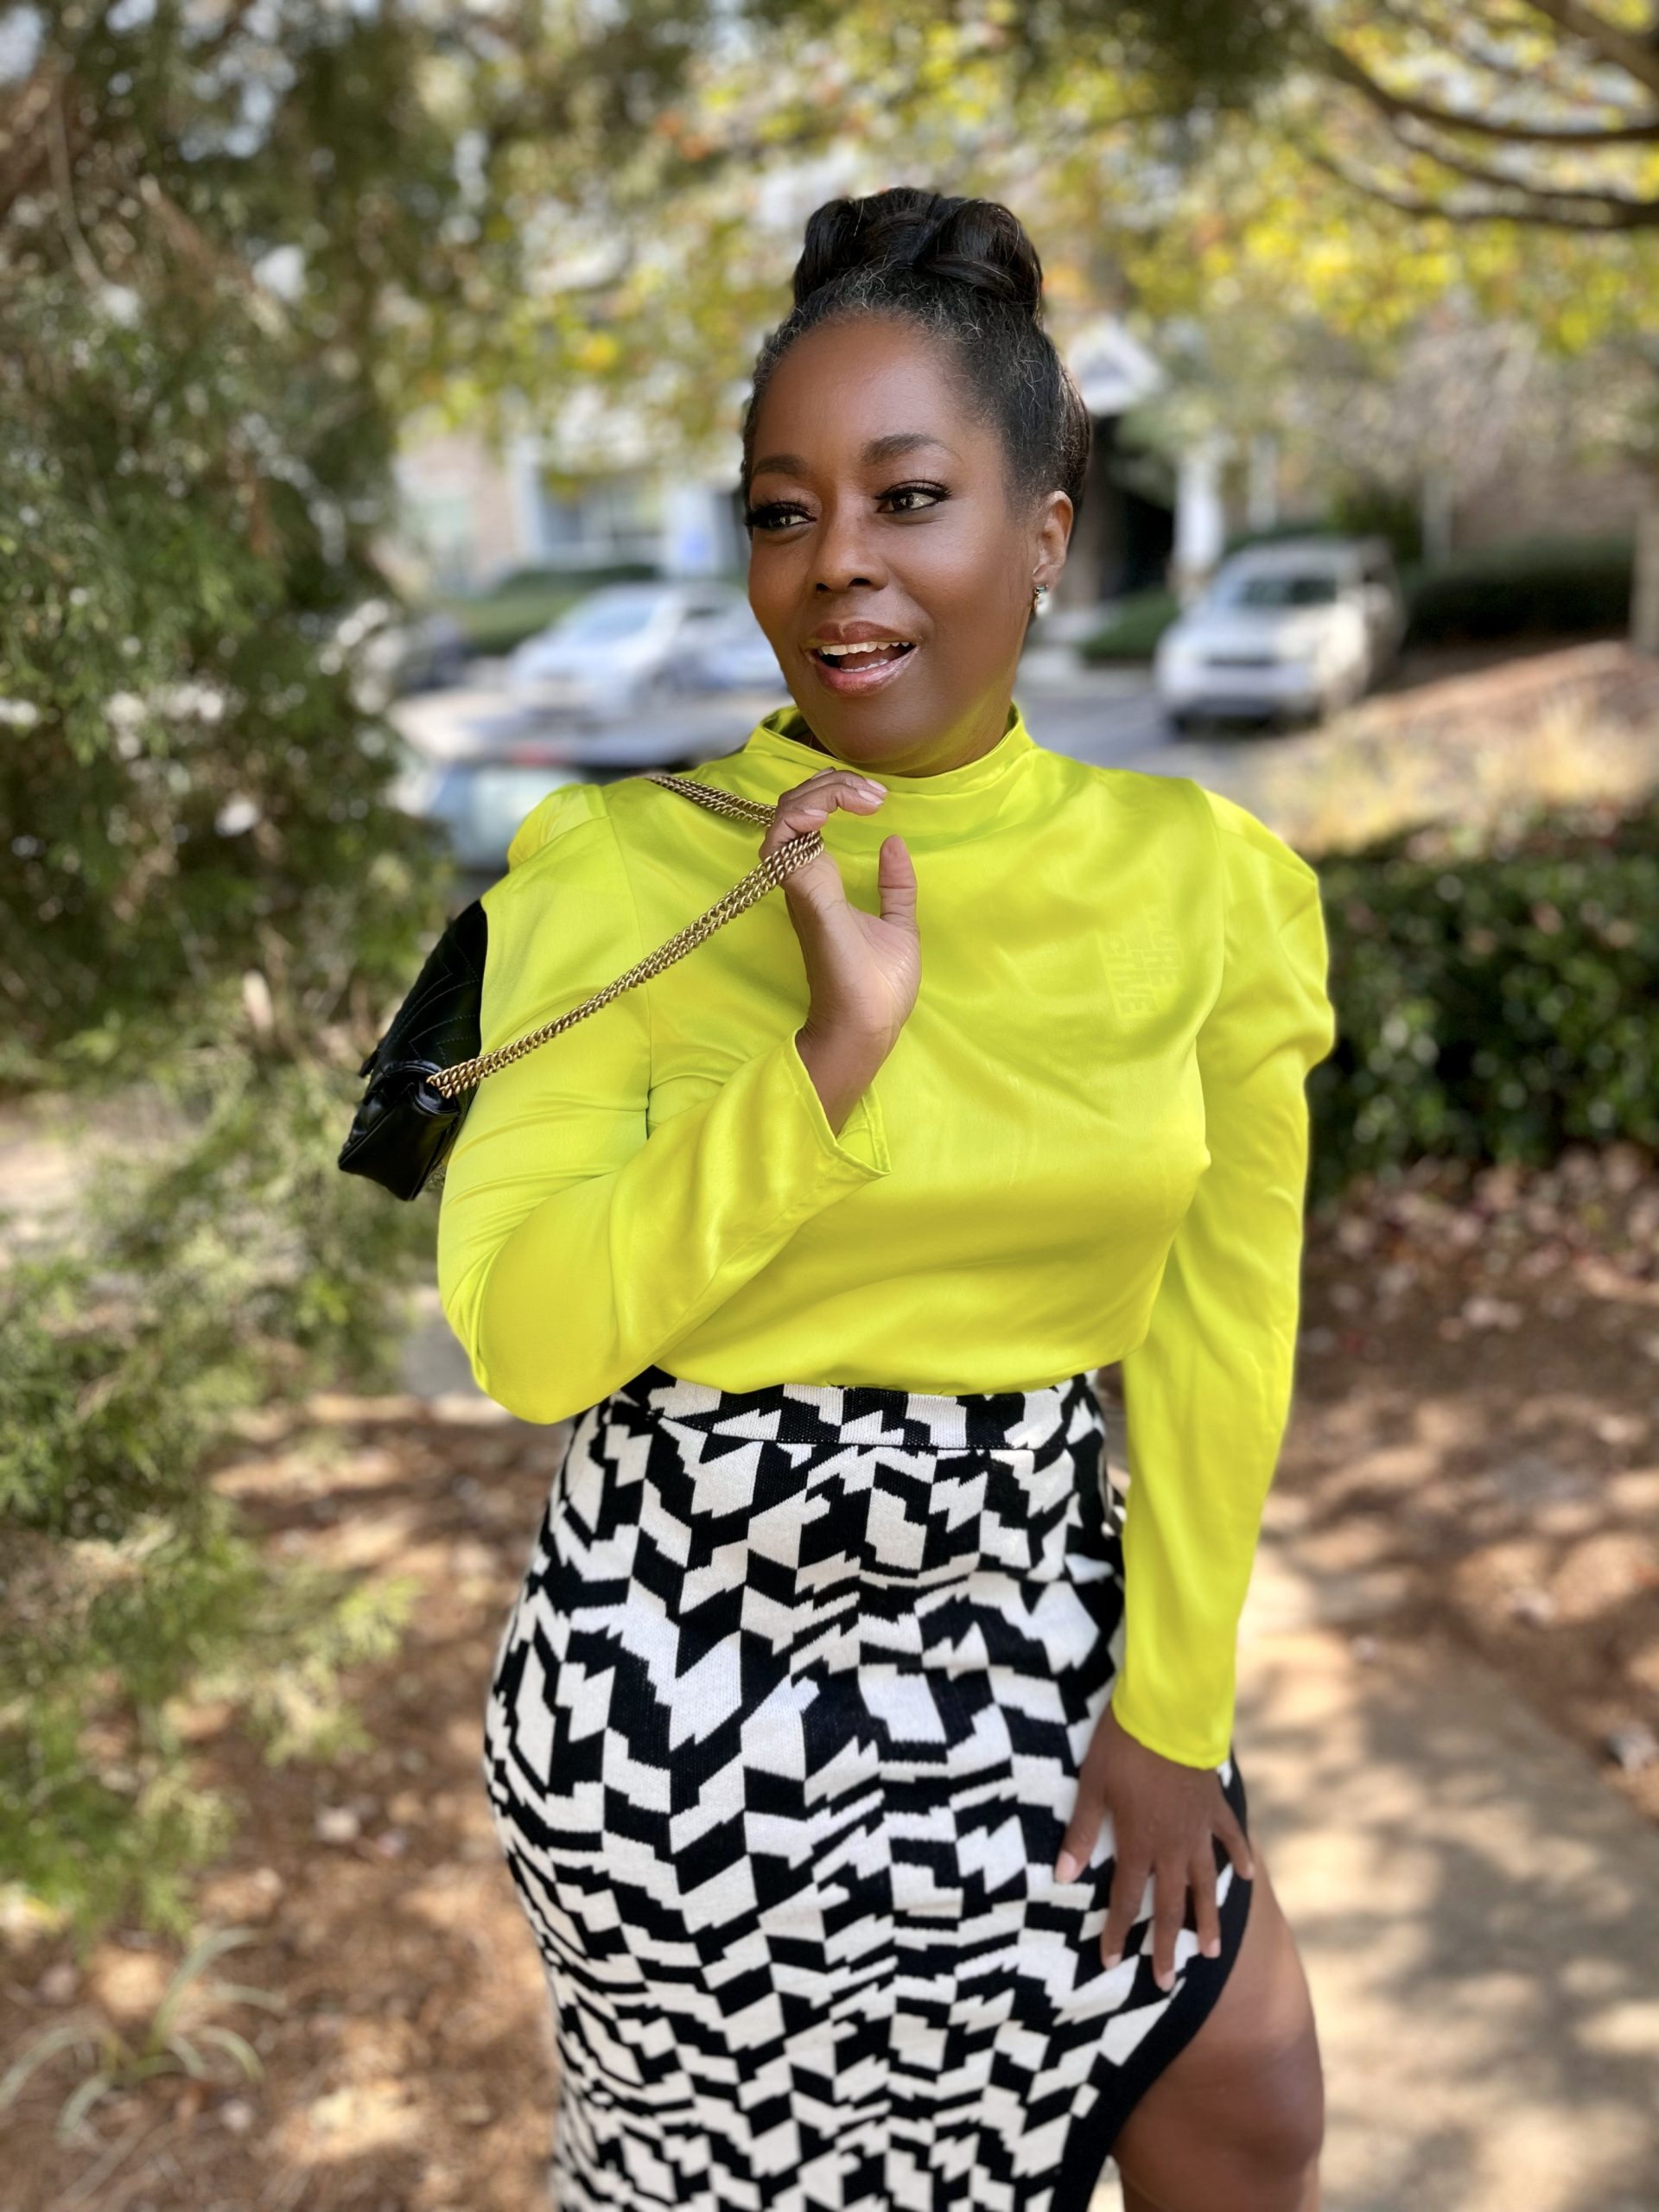 Target's Future Collective First Brand Designer, Kahlana Barfield Brown